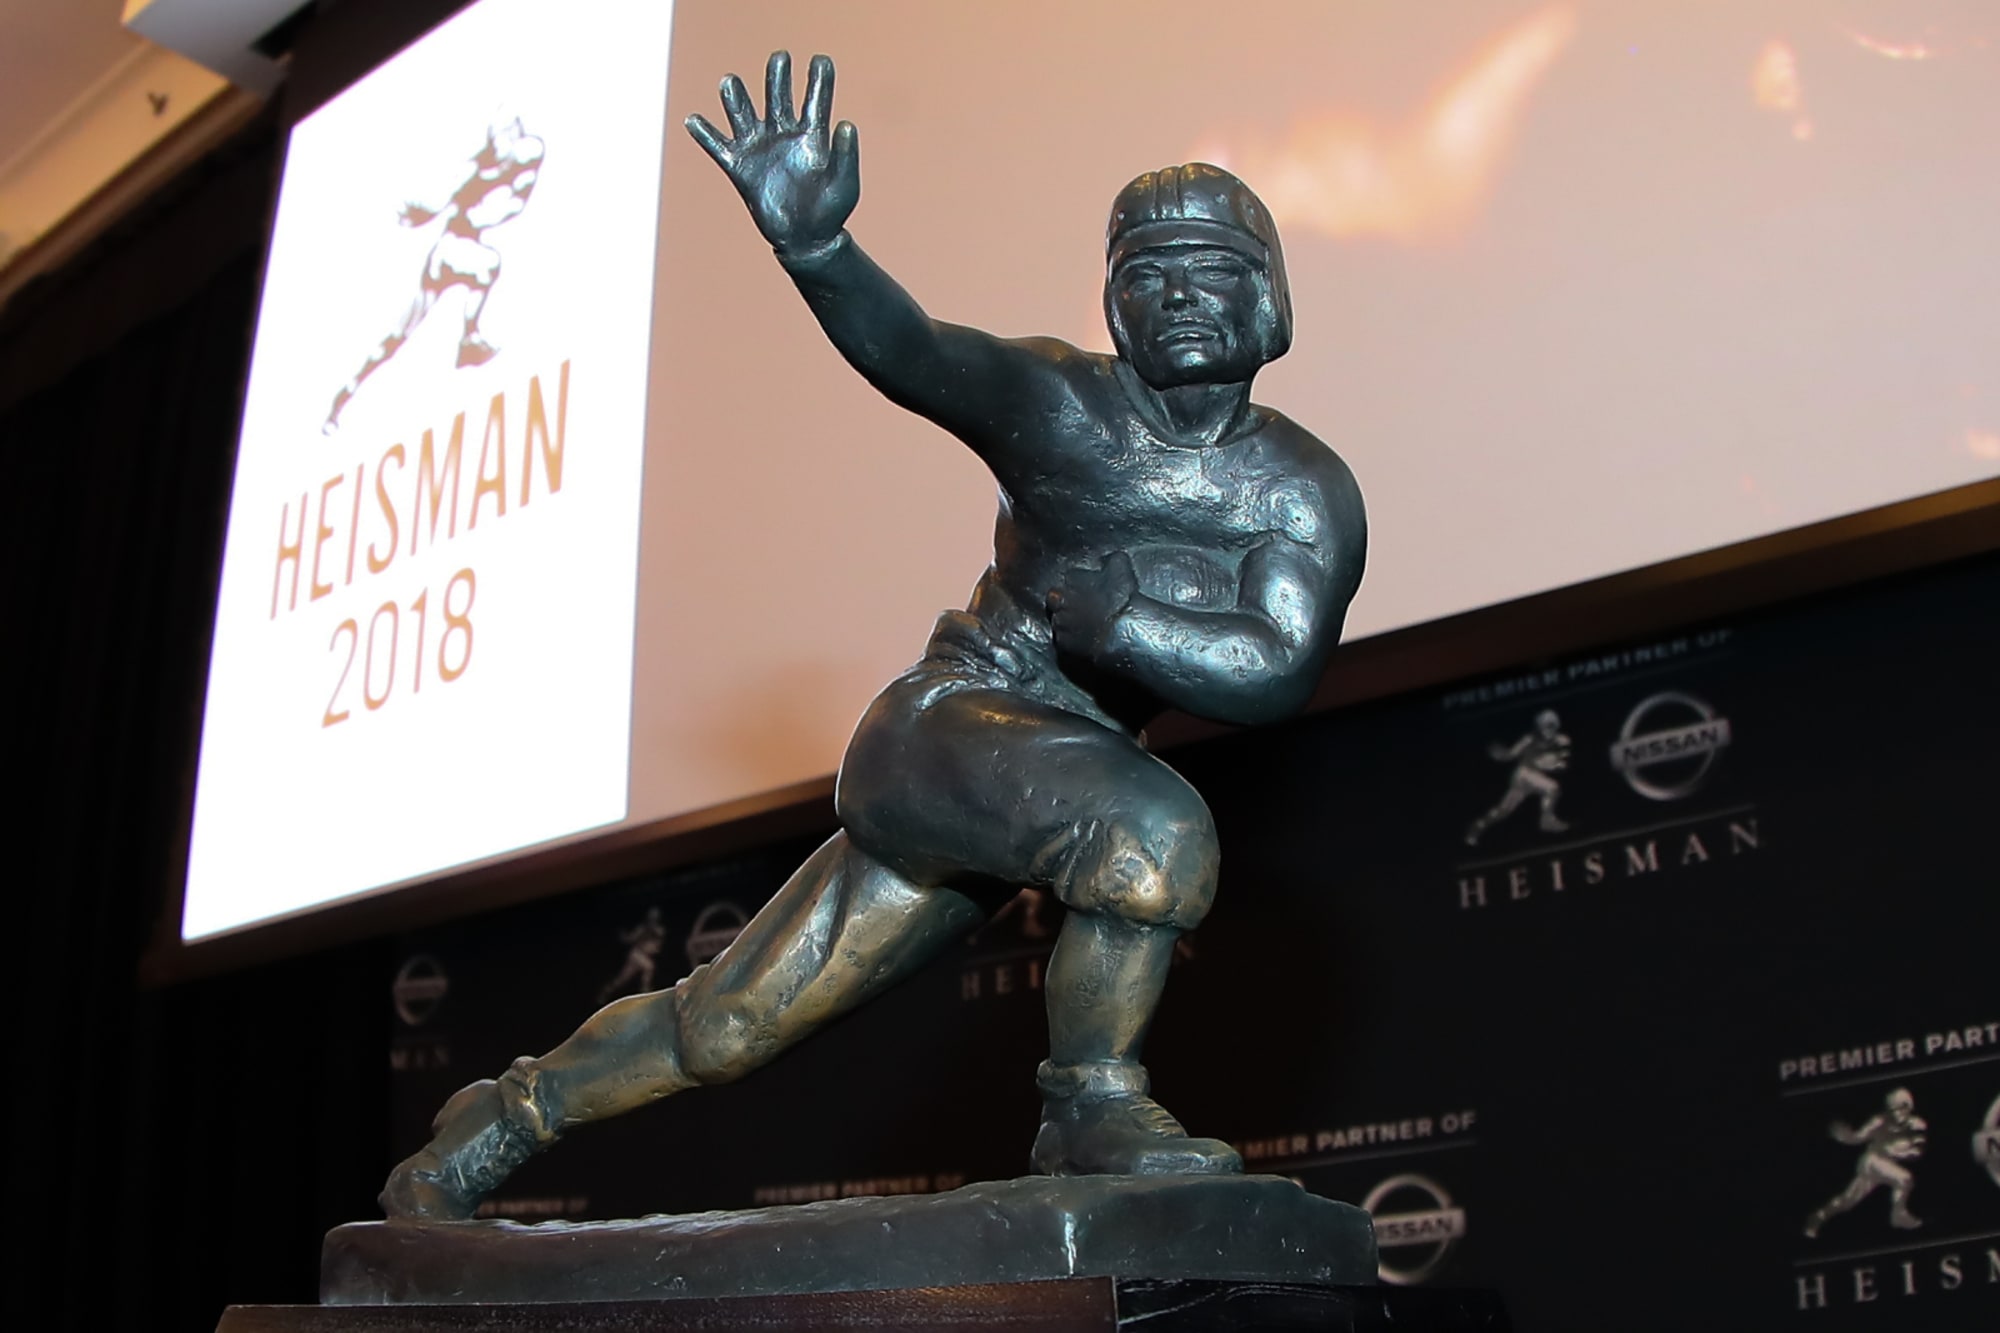 what time is the heisman presentation